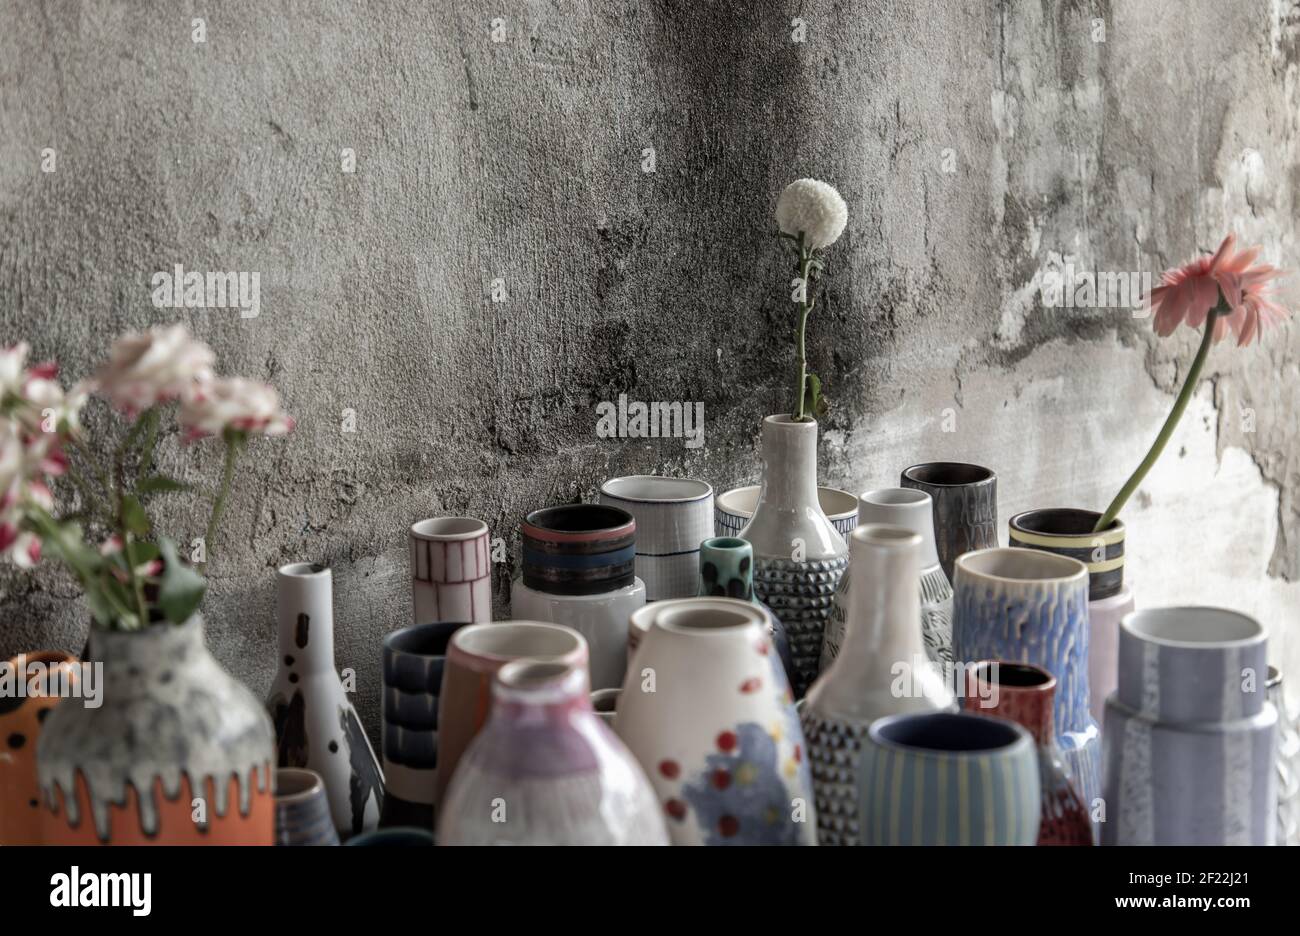 Bouquet of flowers in Handmade Assorted Many Different Ceramic Vases with old cement wall. Home decor. Selective focus. Stock Photo